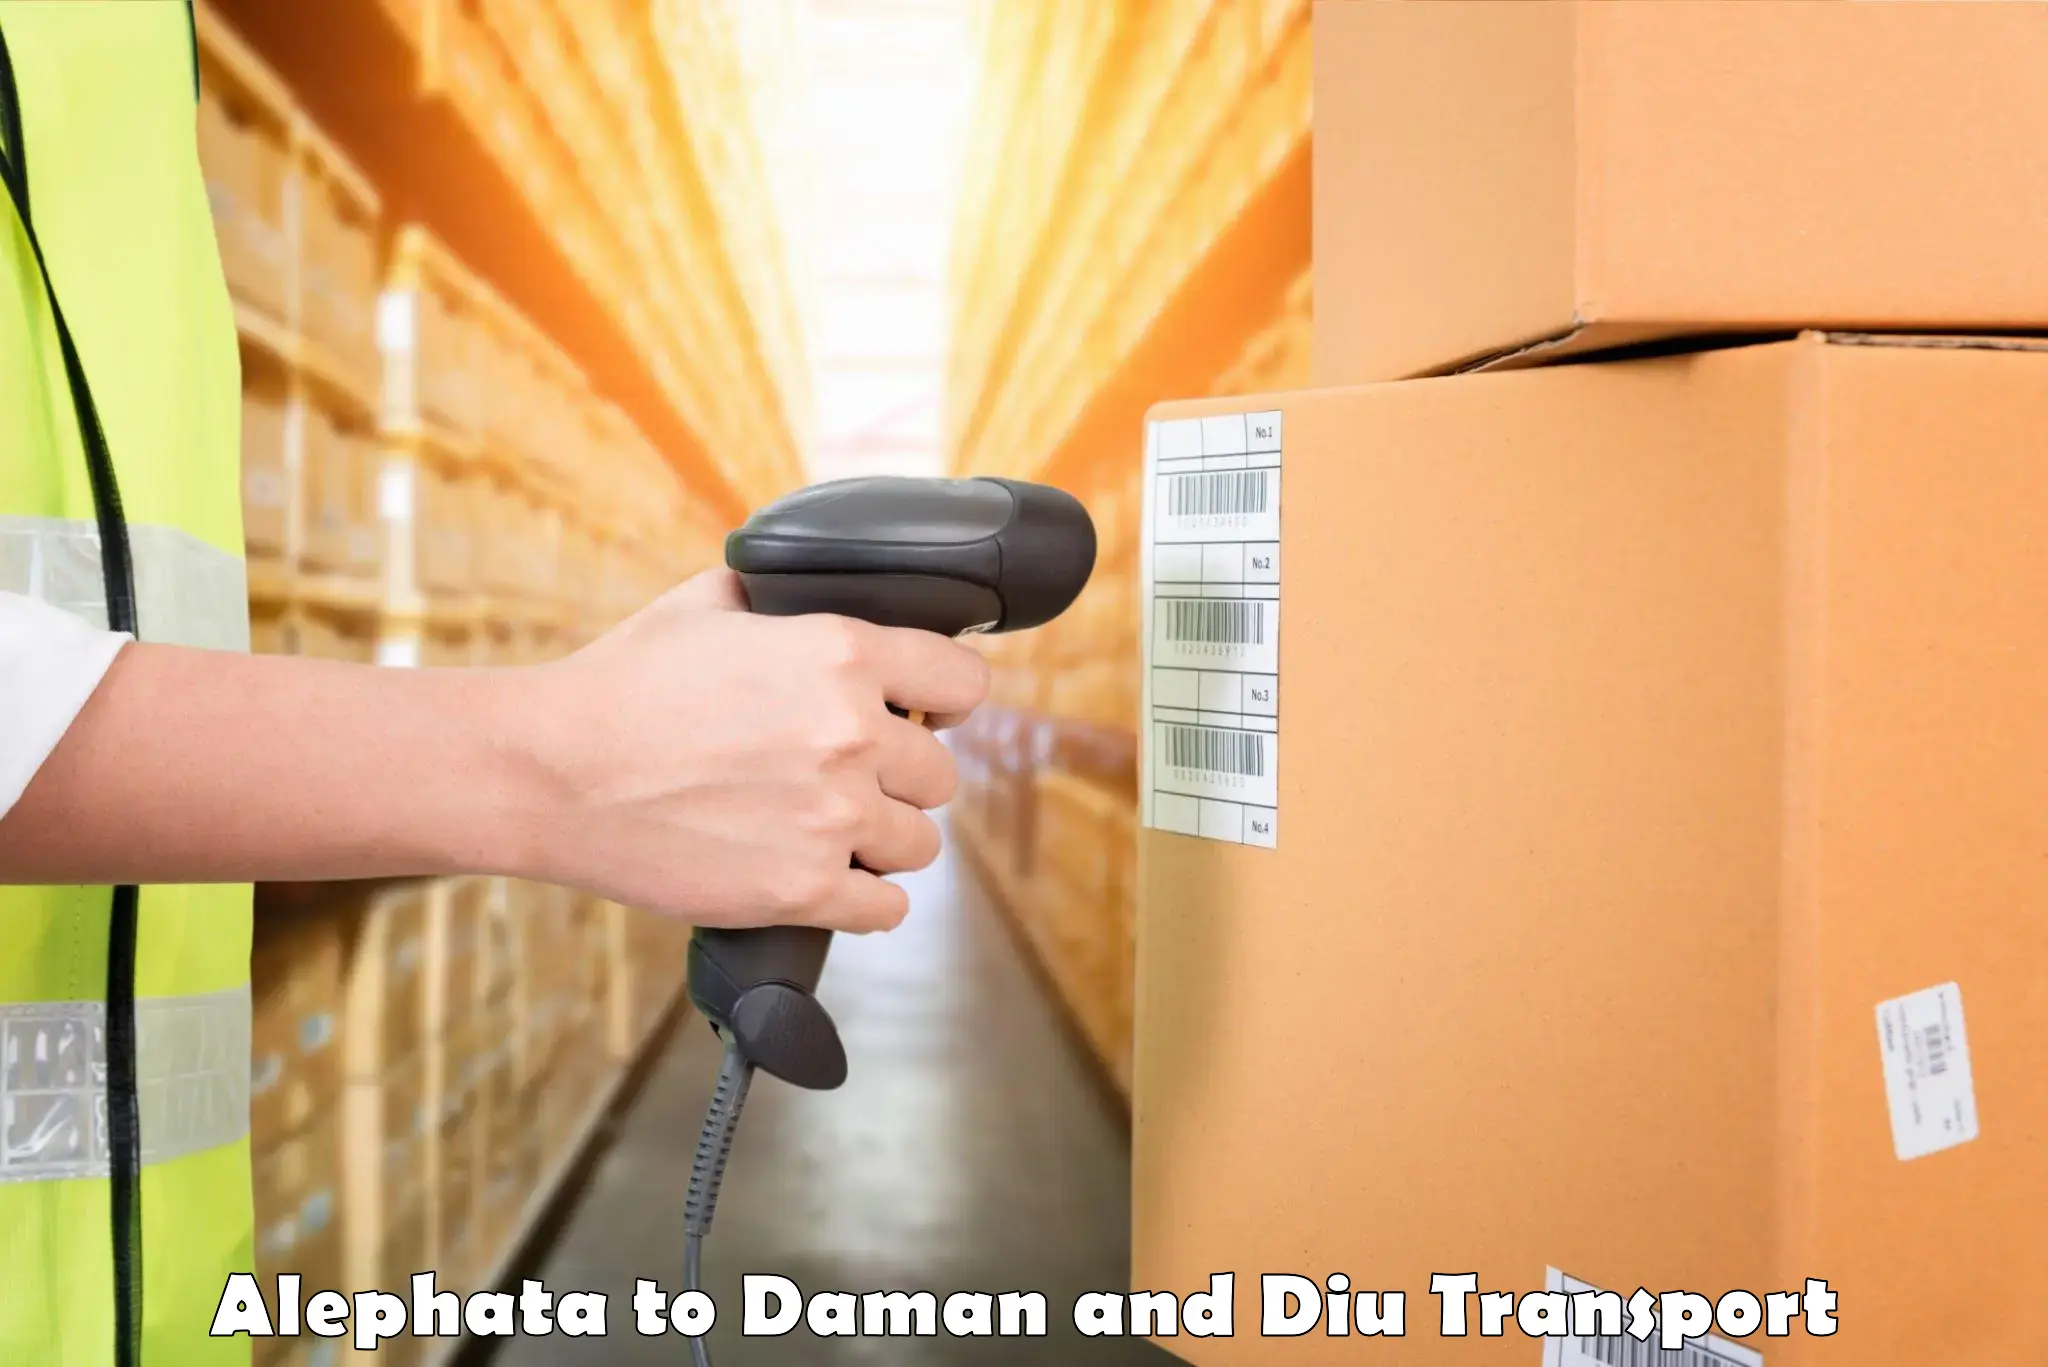 Luggage transport services Alephata to Daman and Diu